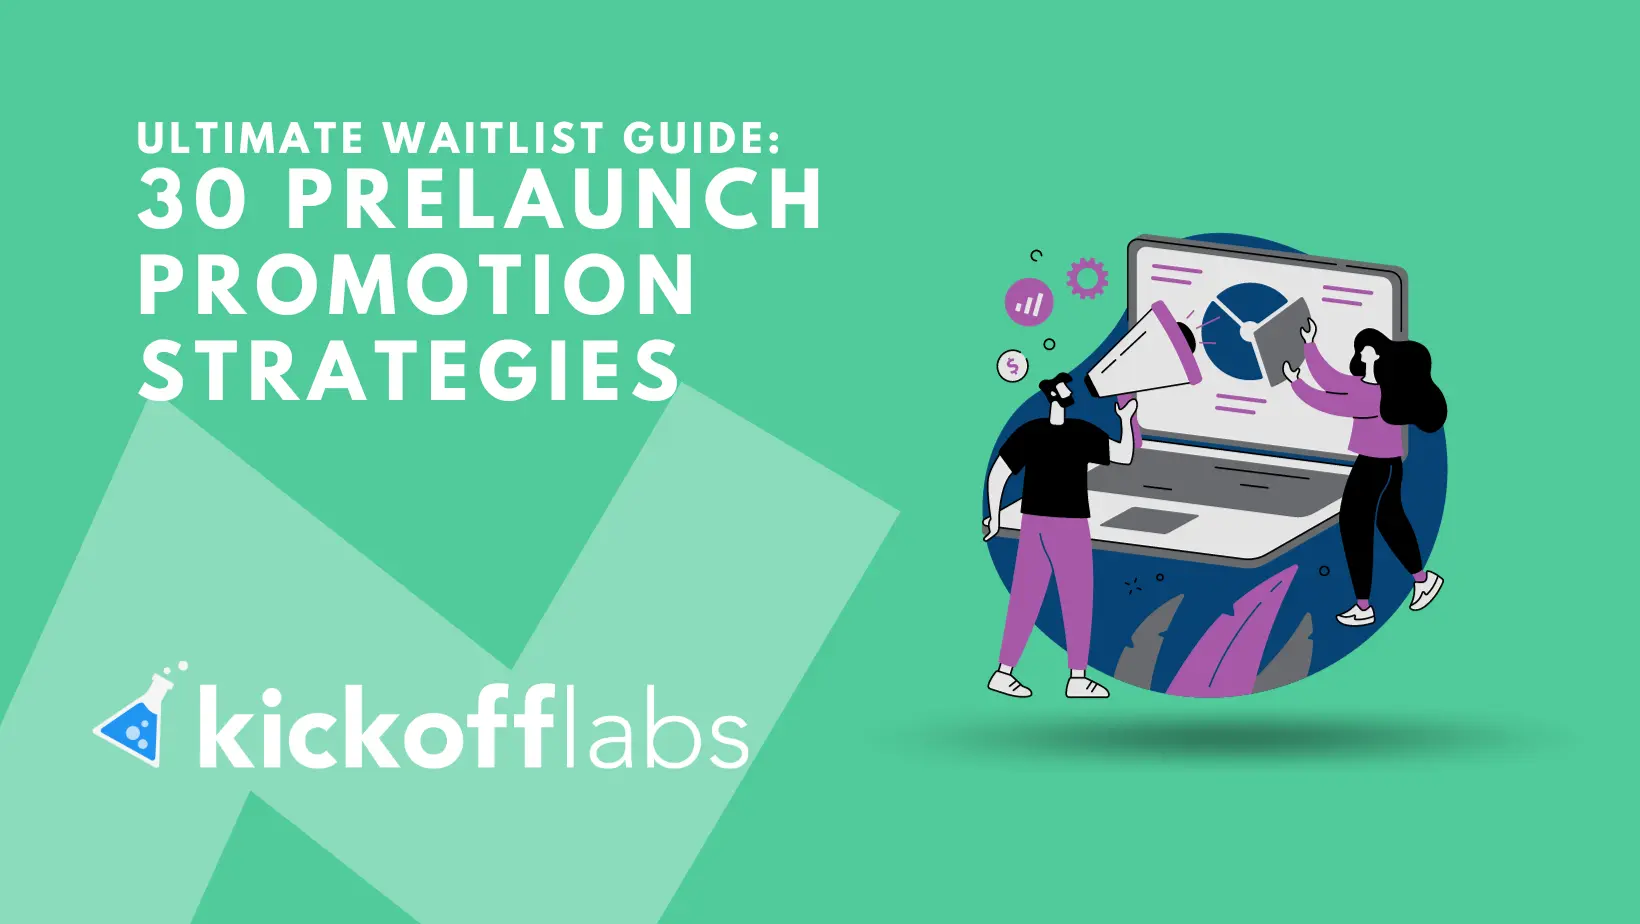 30 Prelaunch Promotion Strategies to Build Hype